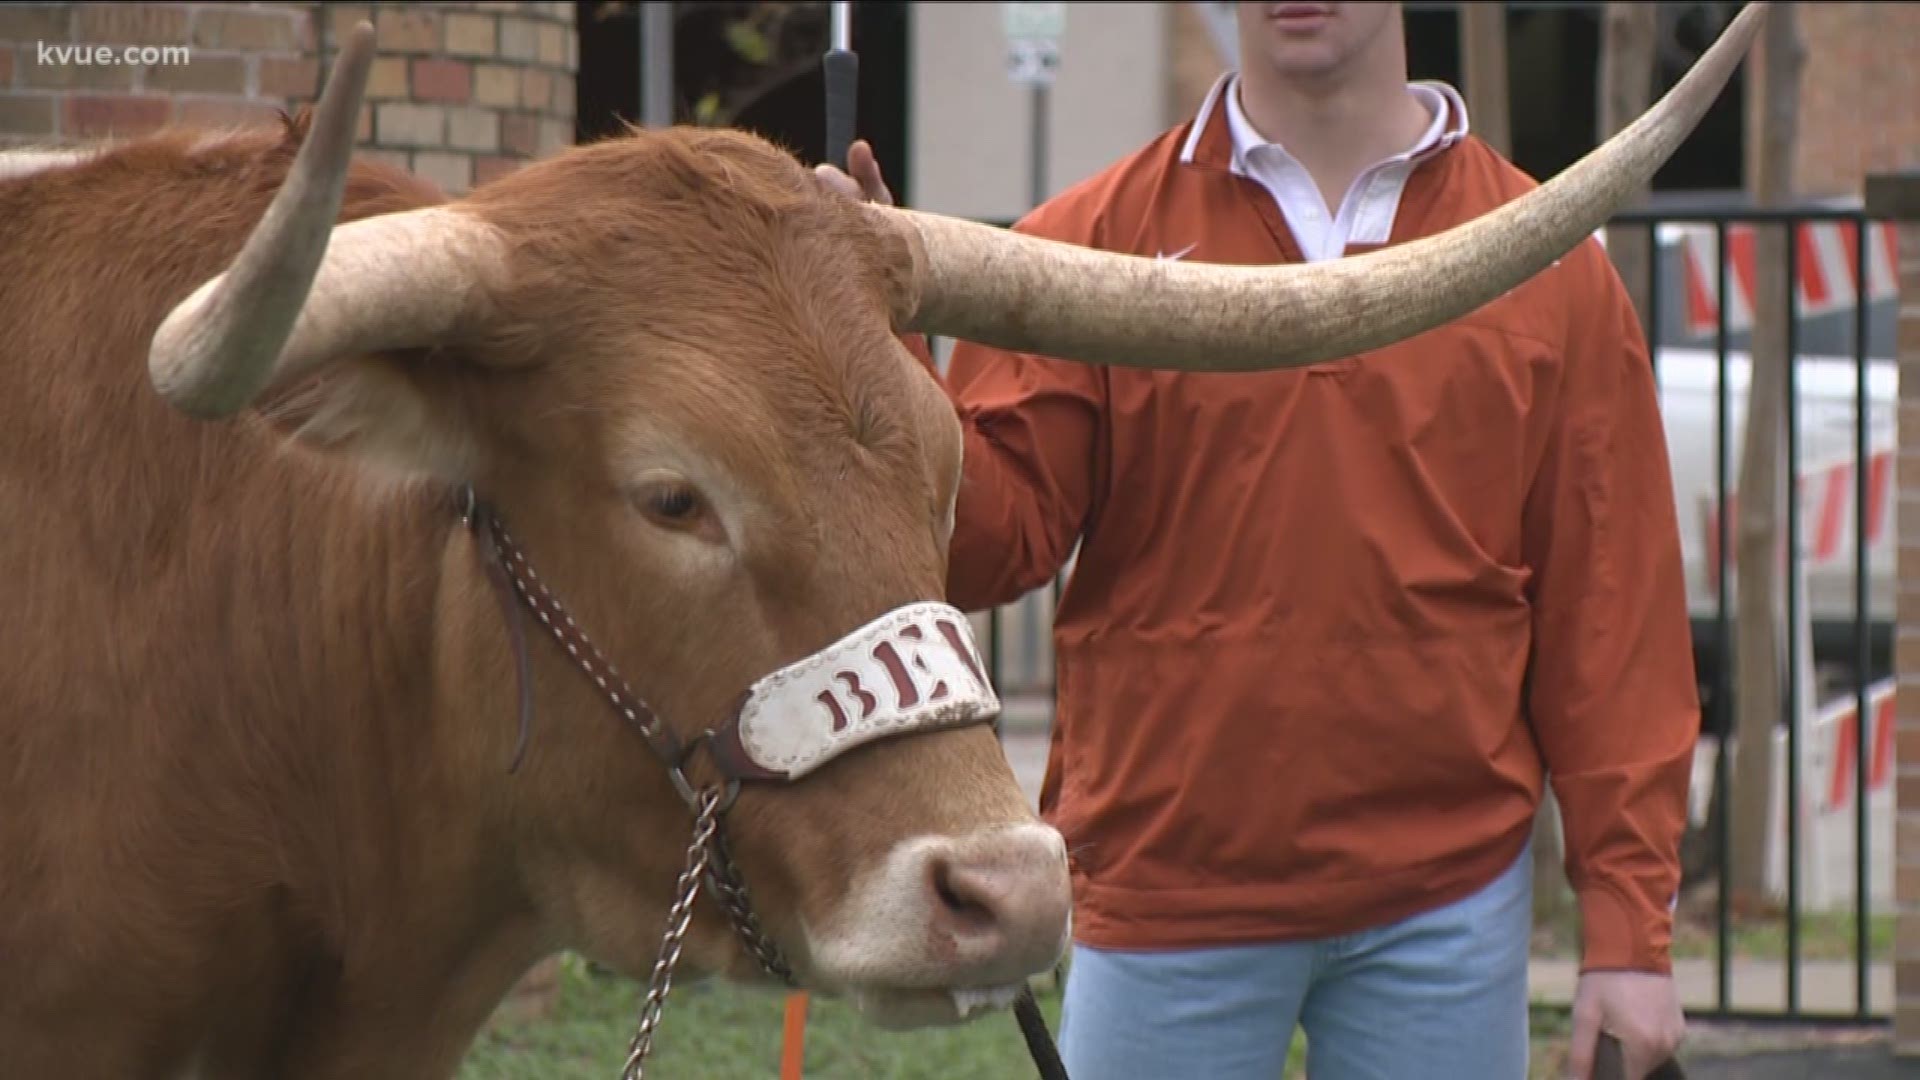 The chilly weather in Austin didn't stop Longhorn lovers from celebrating Bevo's 102nd birthday.